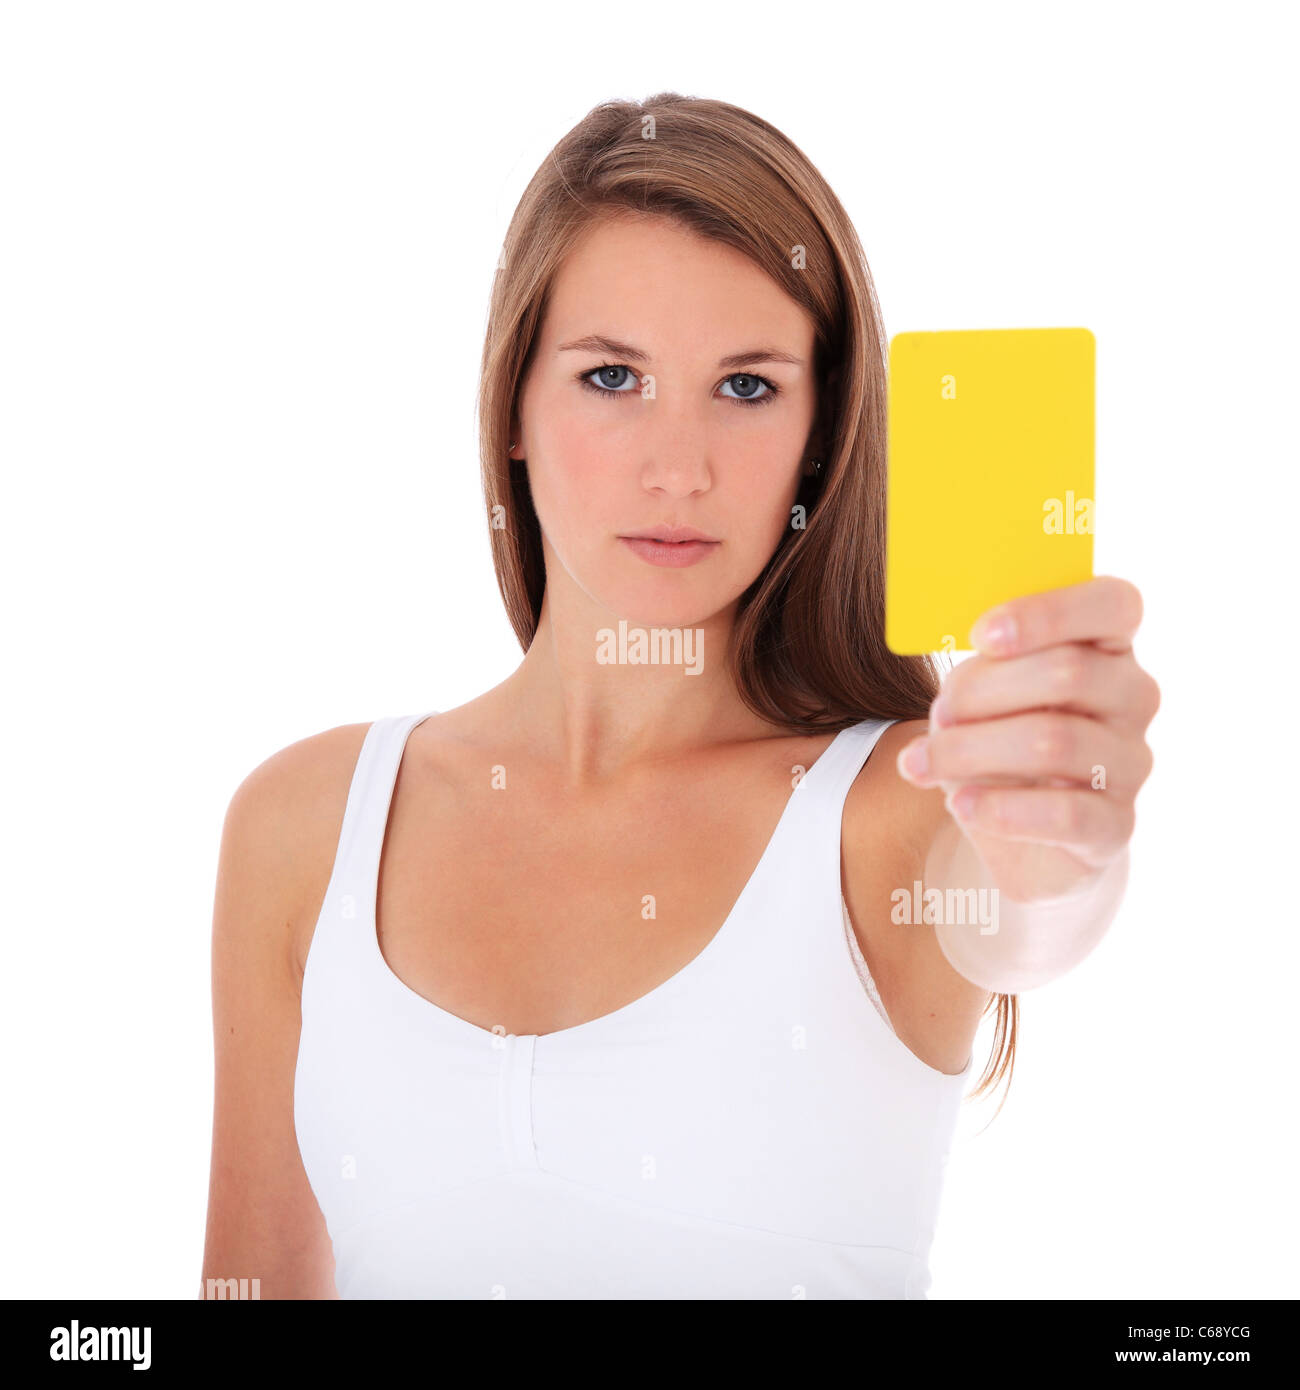 Attractive young woman showing yellow card. All on white background. Stock Photo